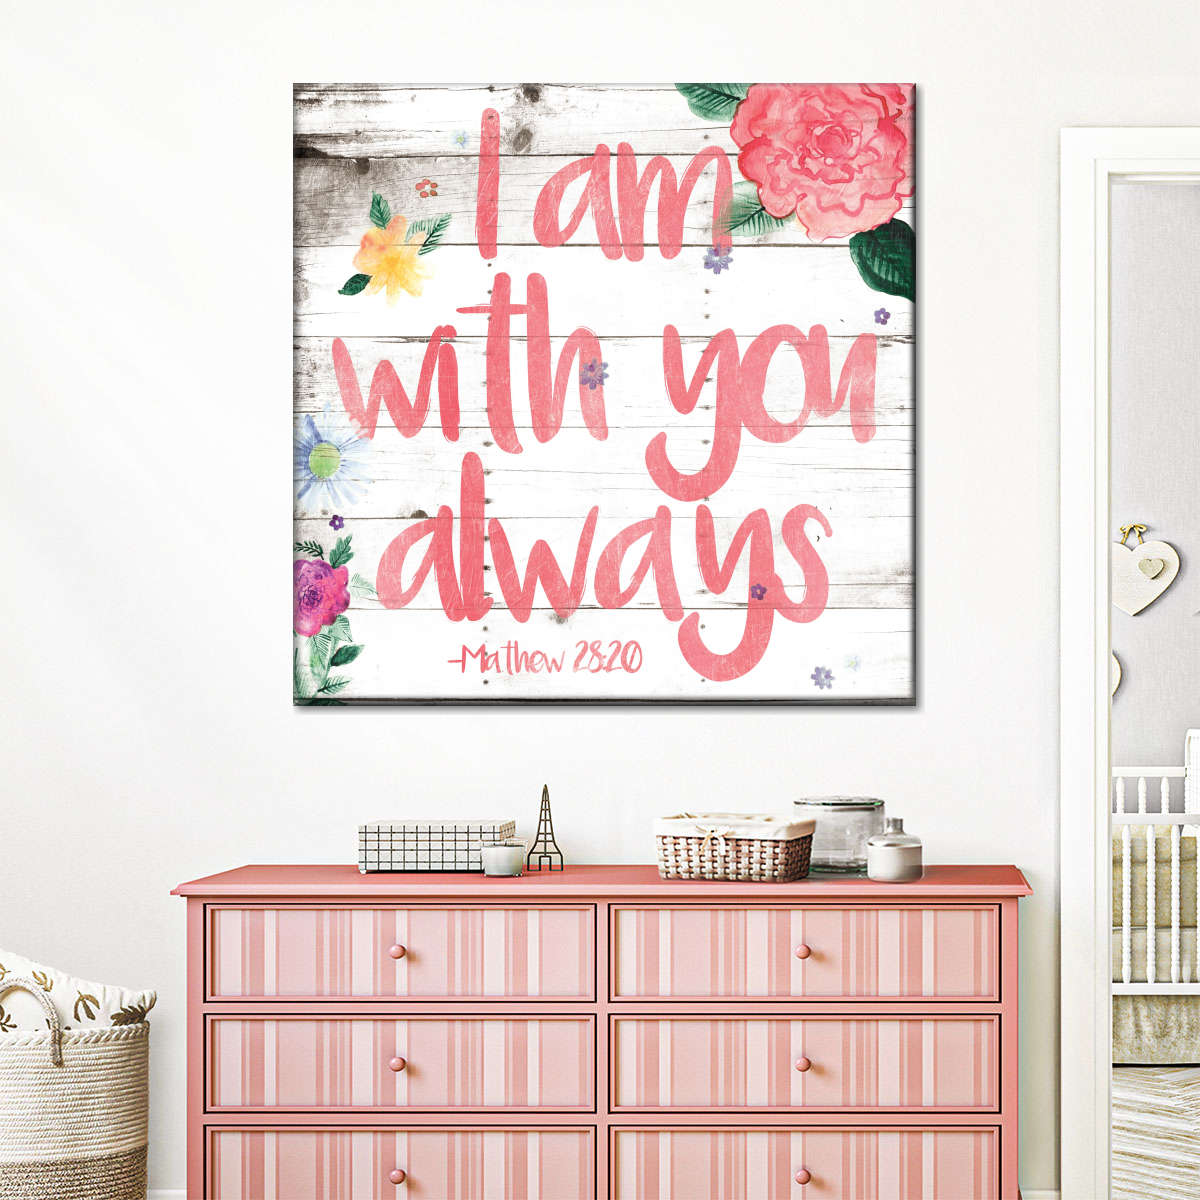 I Am With You Square Canvas Wall Art - Christian Wall Decor - Christian Wall Hanging